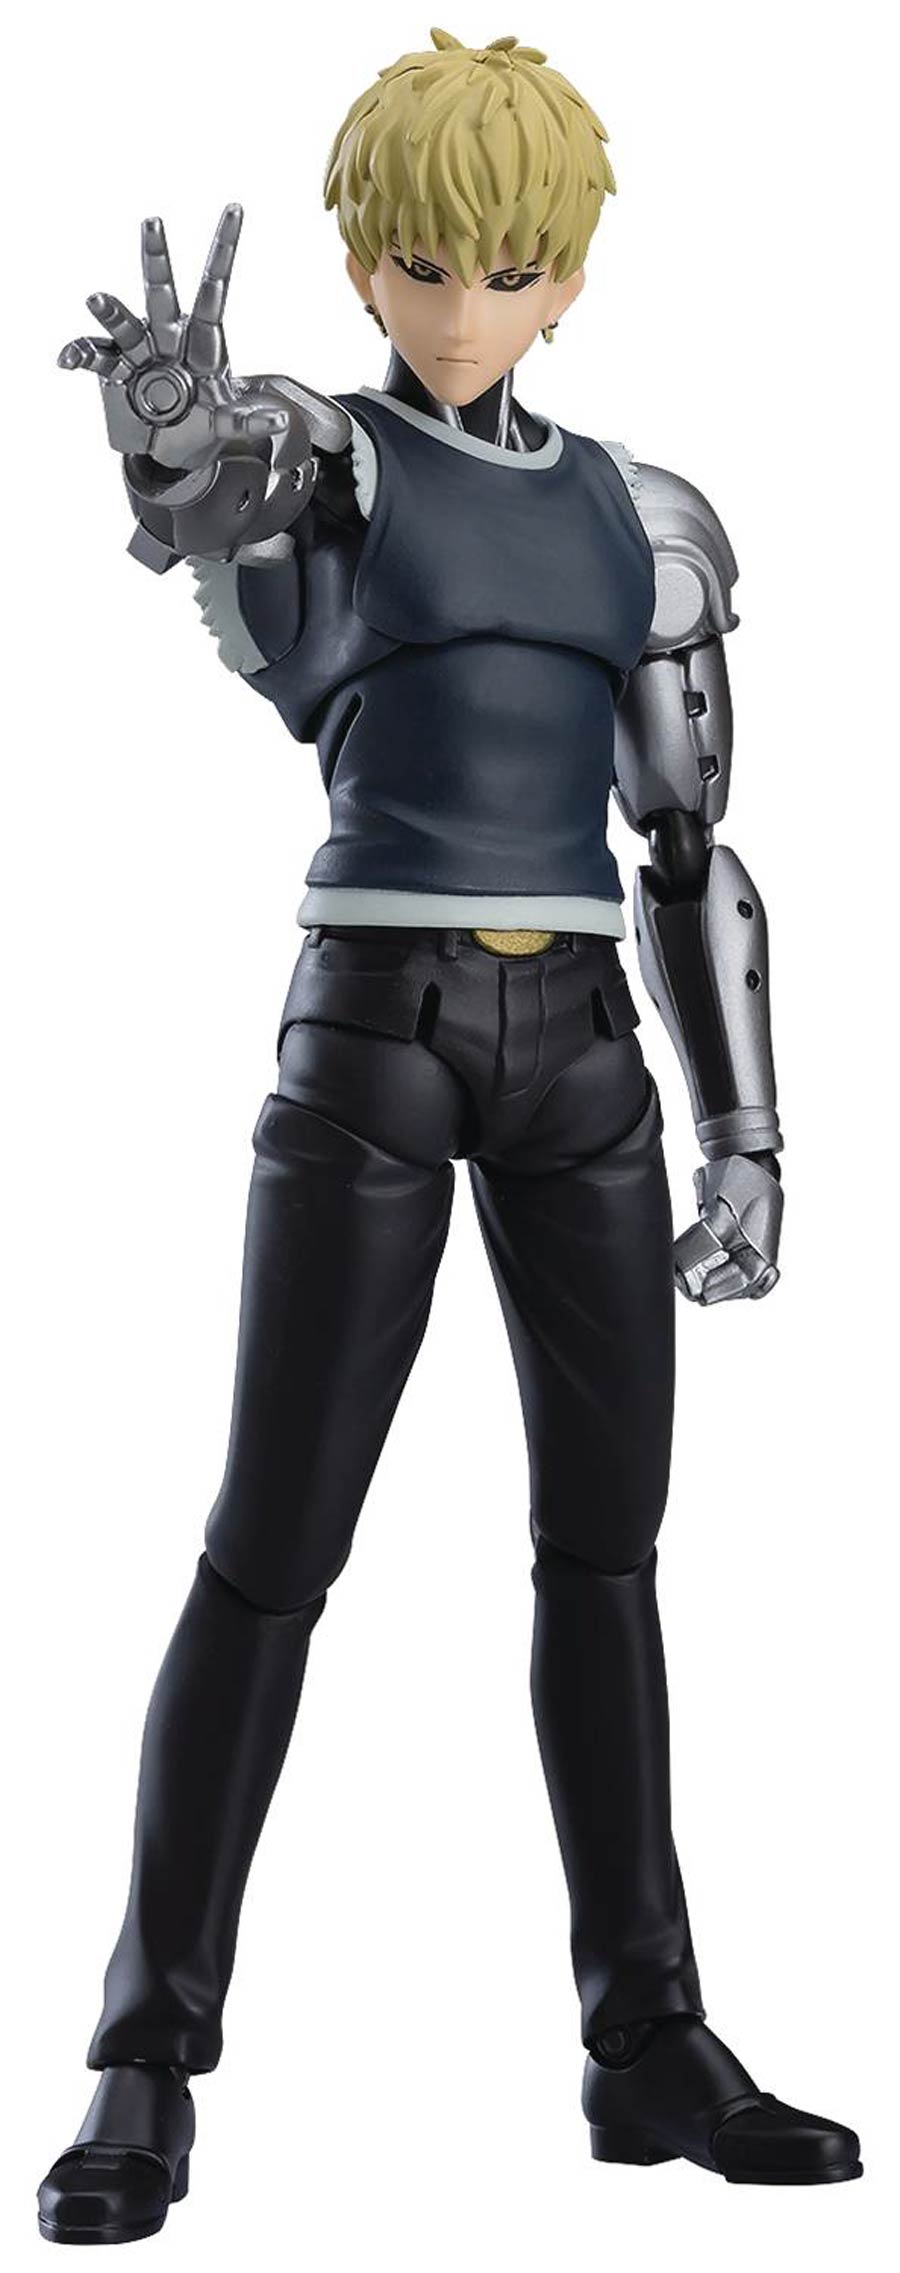 One Punch Man Genos Figma Action Figure